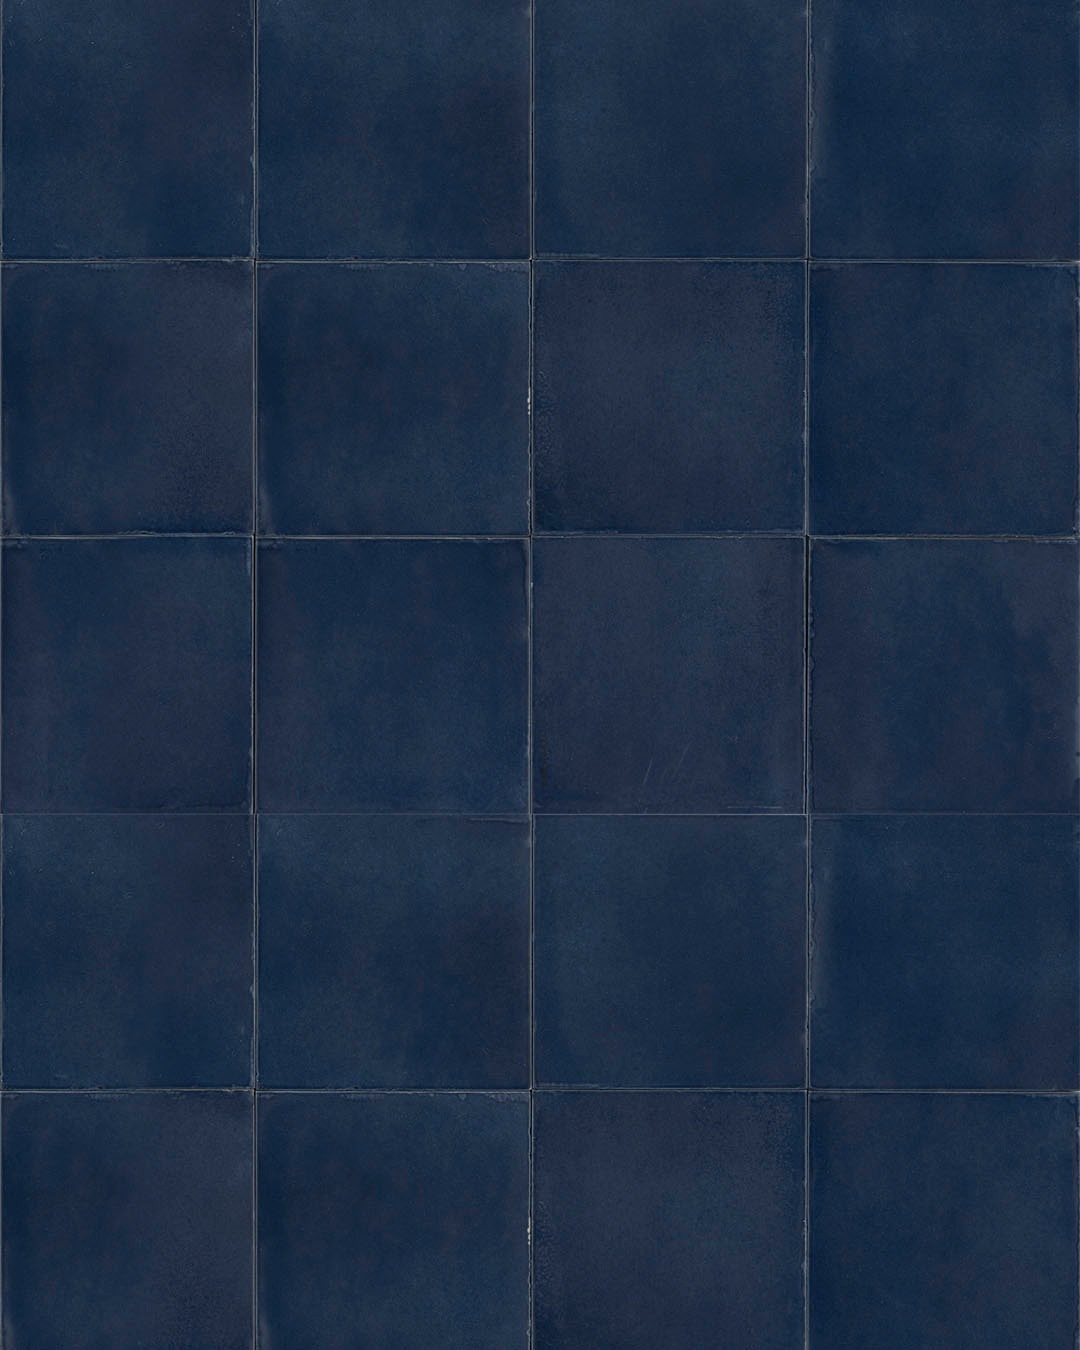 Aesthetic suggestion of yesteryear.

These traditional majolica tiles from southern Italy, chosen here in the BLUE variant of the CROGIOLO MEMORIA porcelain stoneware collection, cover the living room floor to take us back to a timeless past.

#Marazzi #MarazziCeramiche #MarazziHumanDesign #MarazziProduct #Ceramic #CeramicTile #Tiles #InteriorDesign #TileInspiration #BespokeInteriors #TilesLover #TileWork #TiledSpaces #TileLife #TileDecor #CrogioloMemoria